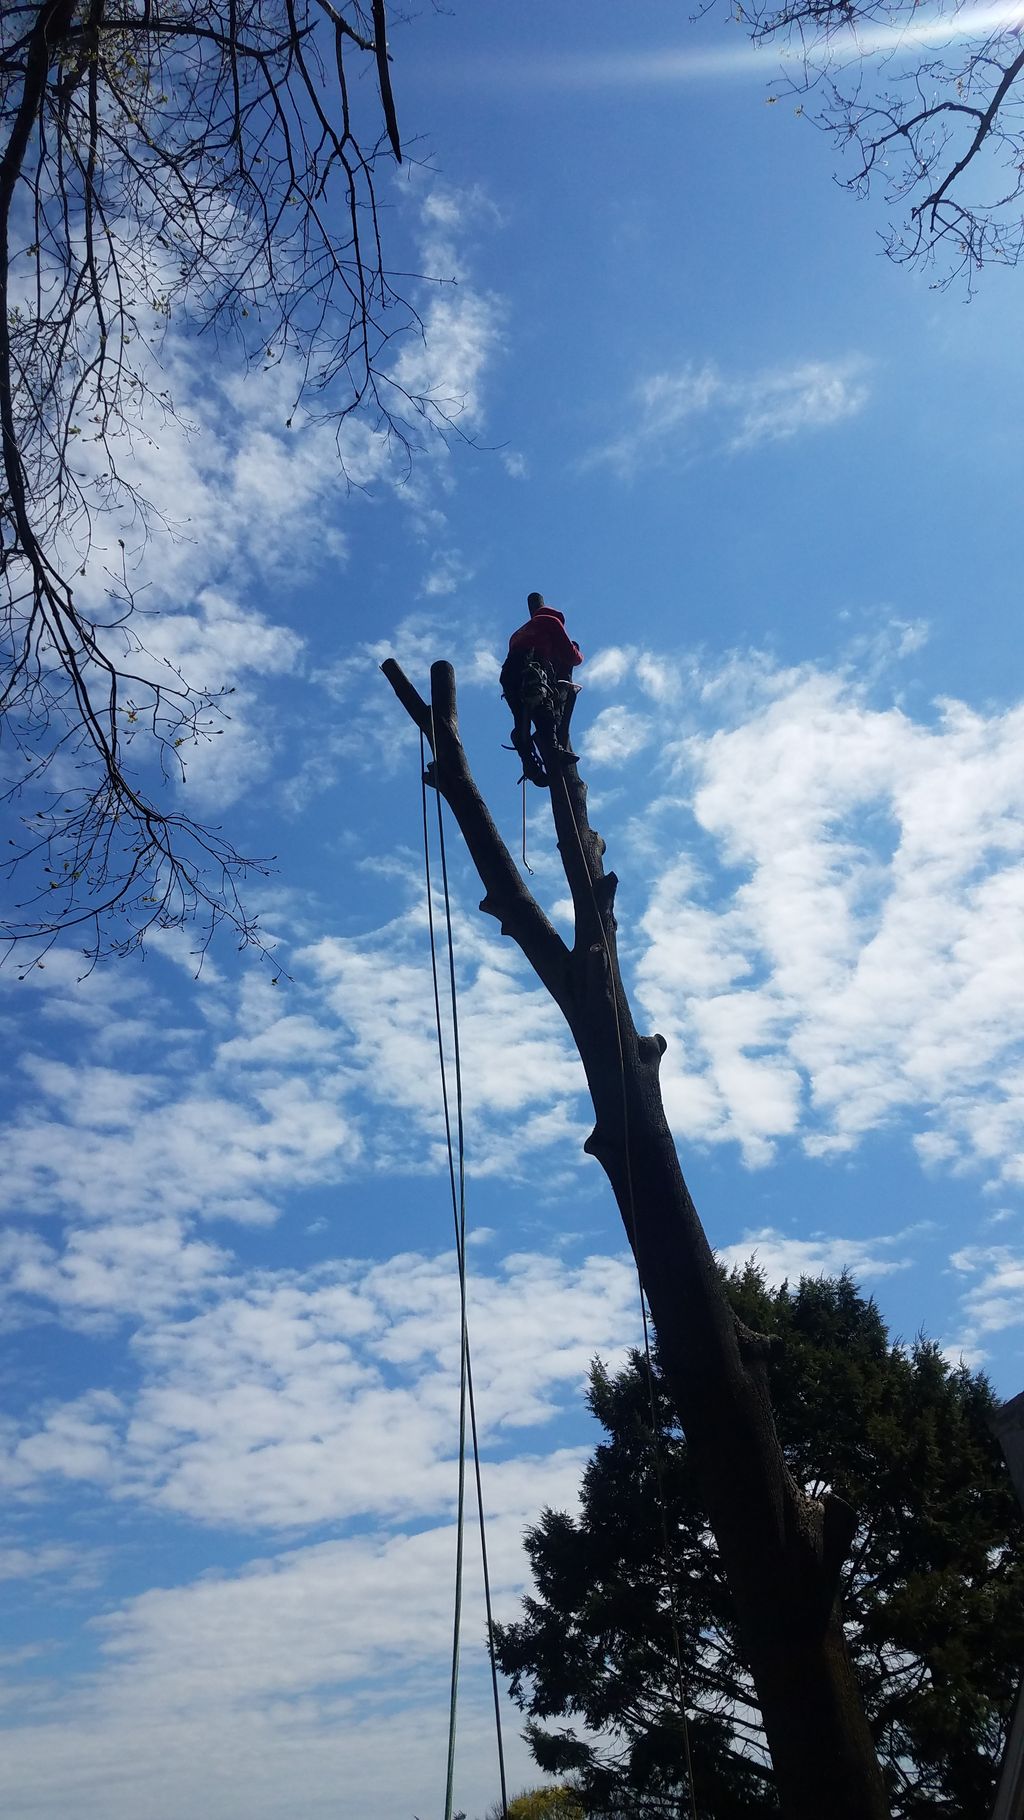 Eddy B Landscaping and Tree Services